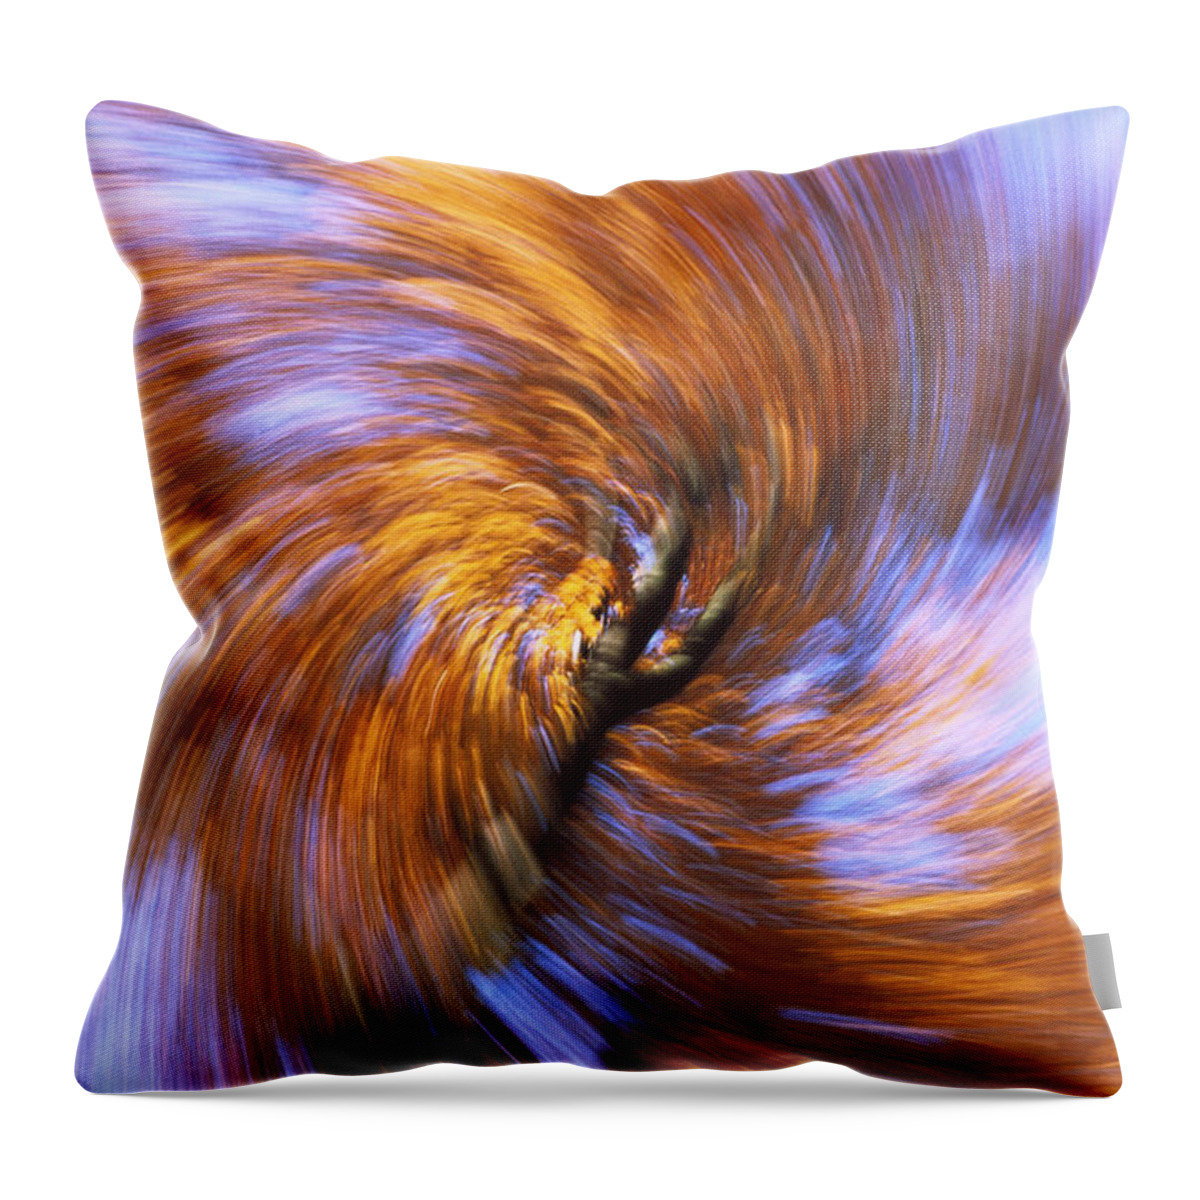 00198039 Throw Pillow featuring the photograph European Beach Leaves Abstract by Konrad Wothe